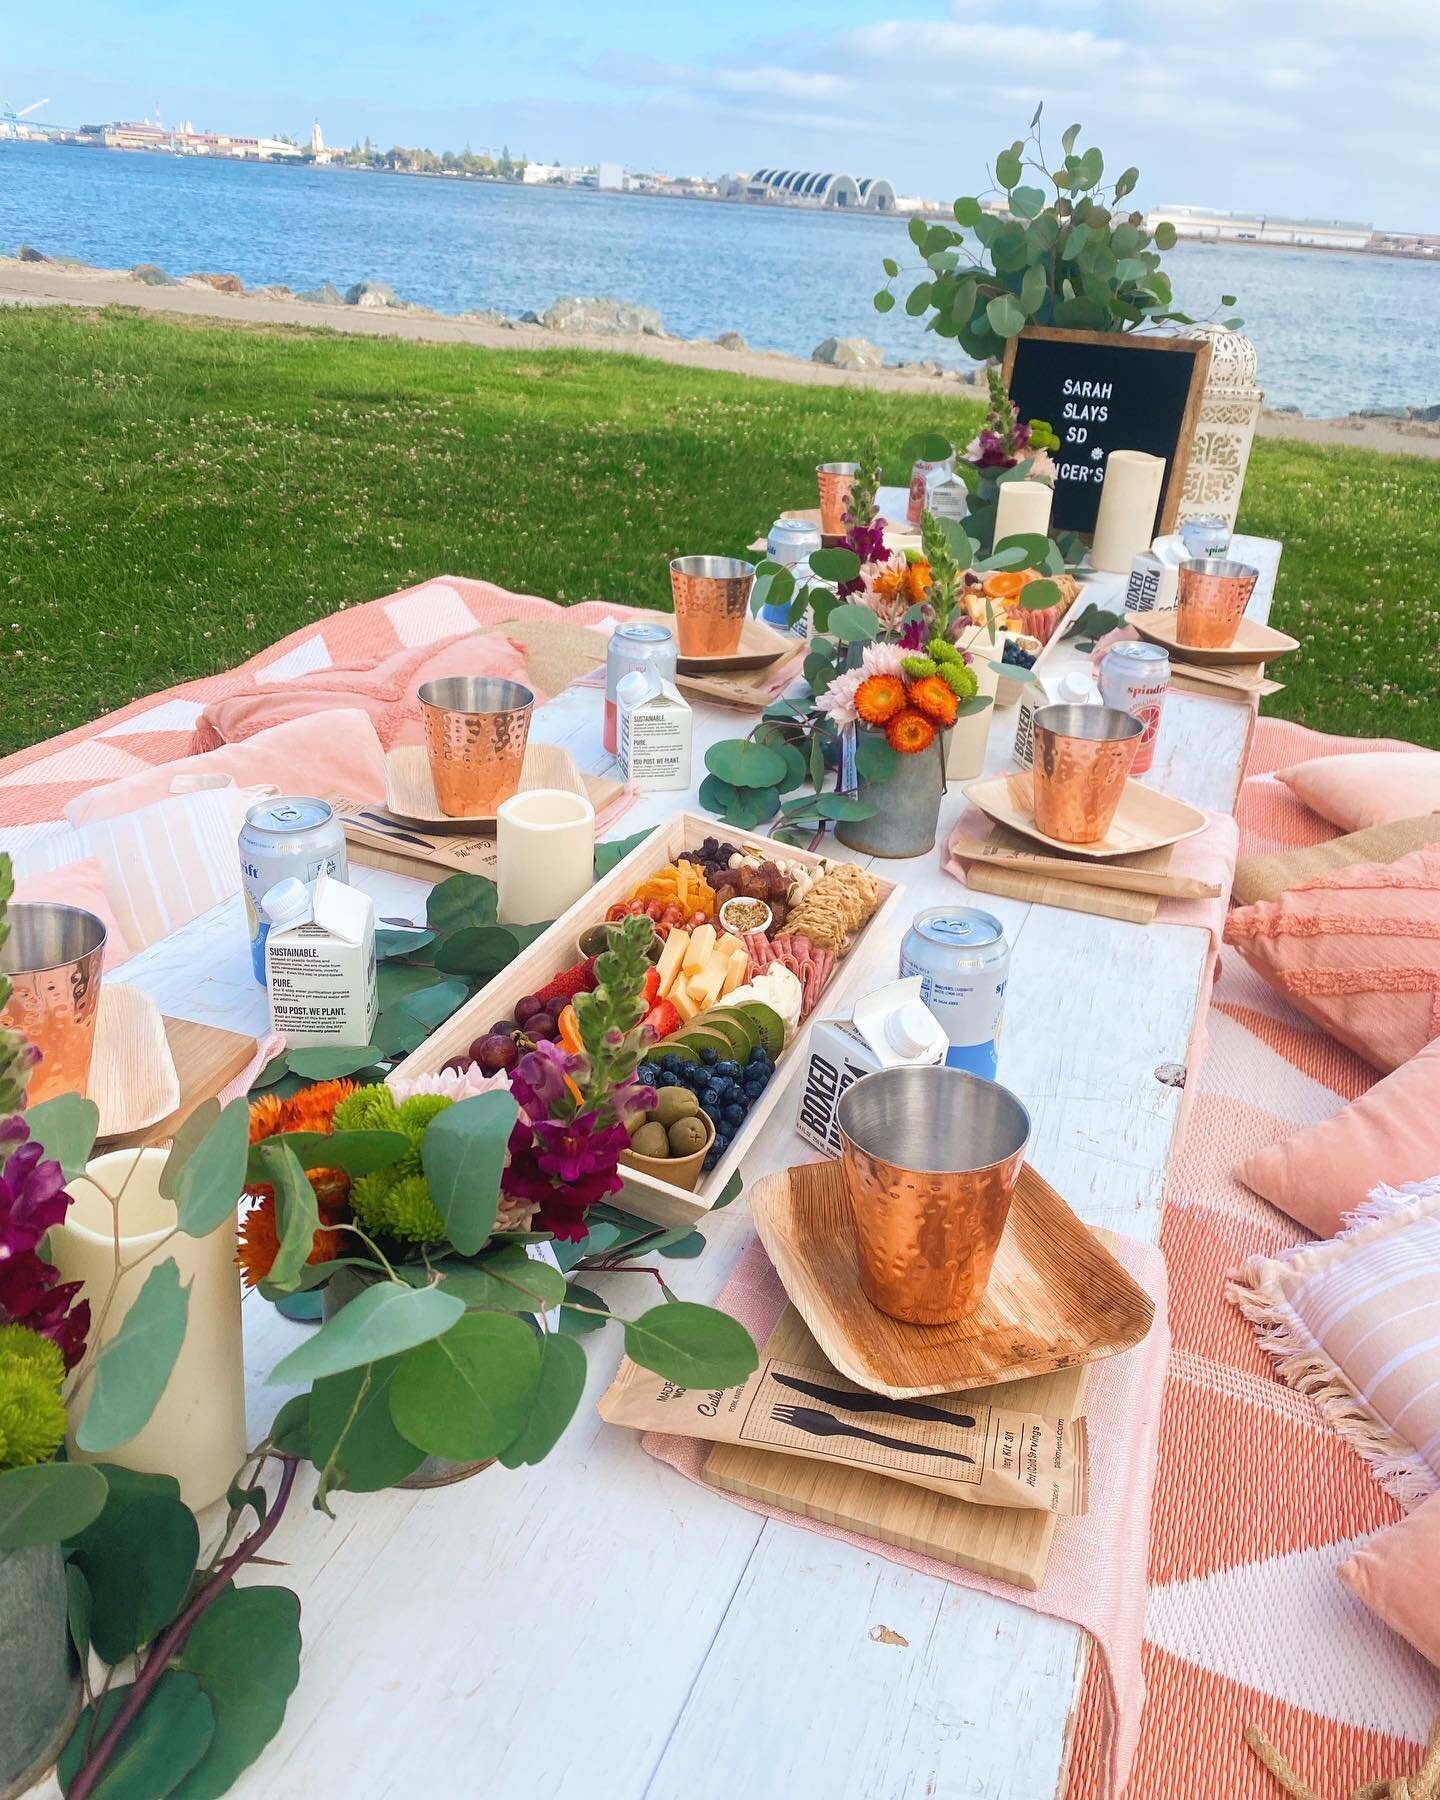 Happy Friday!!! What&rsquo;s your favorite summer weekend activity?? ☀️💕🌊 If we had to choose.. definitely a #popuppicnic 😜 

#popuppicnicco #parkpicnic #bachelorettepicnic #summeractivity #thingstodoinsandiego #engagementparty #grazingboard #flow